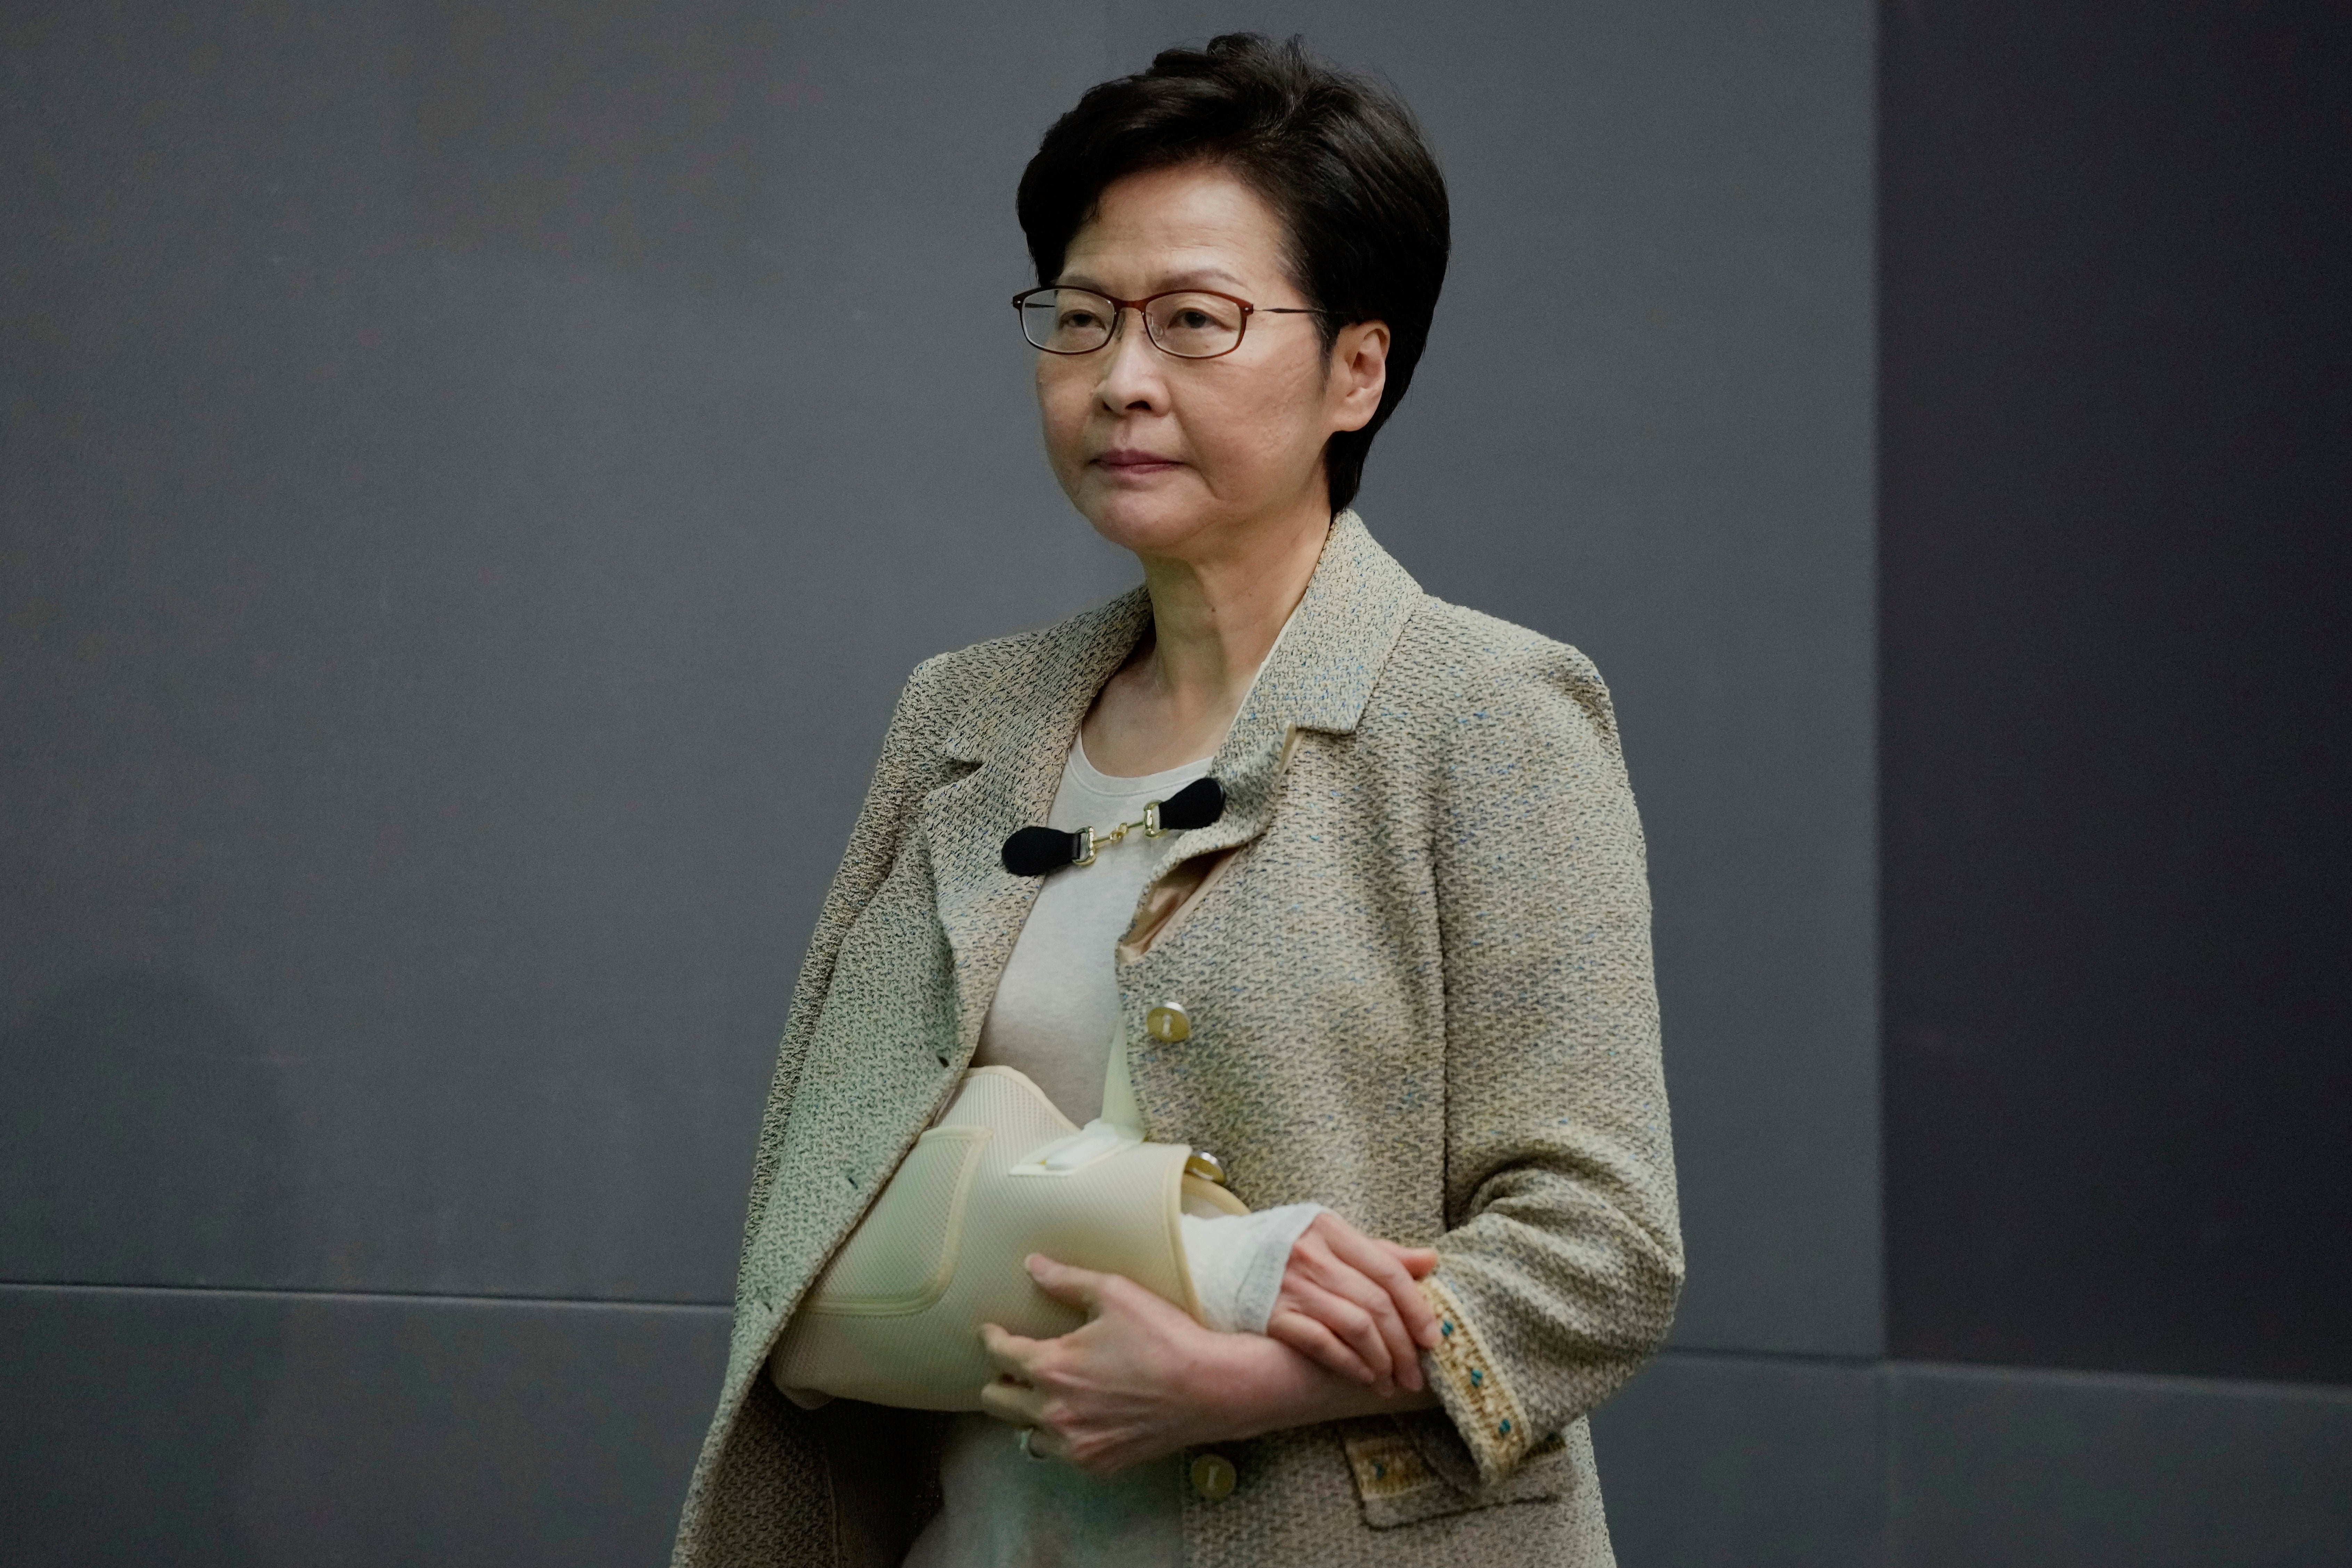 File image: The intimidating letter was discovered during a routine check of Carrie Lam’s mail